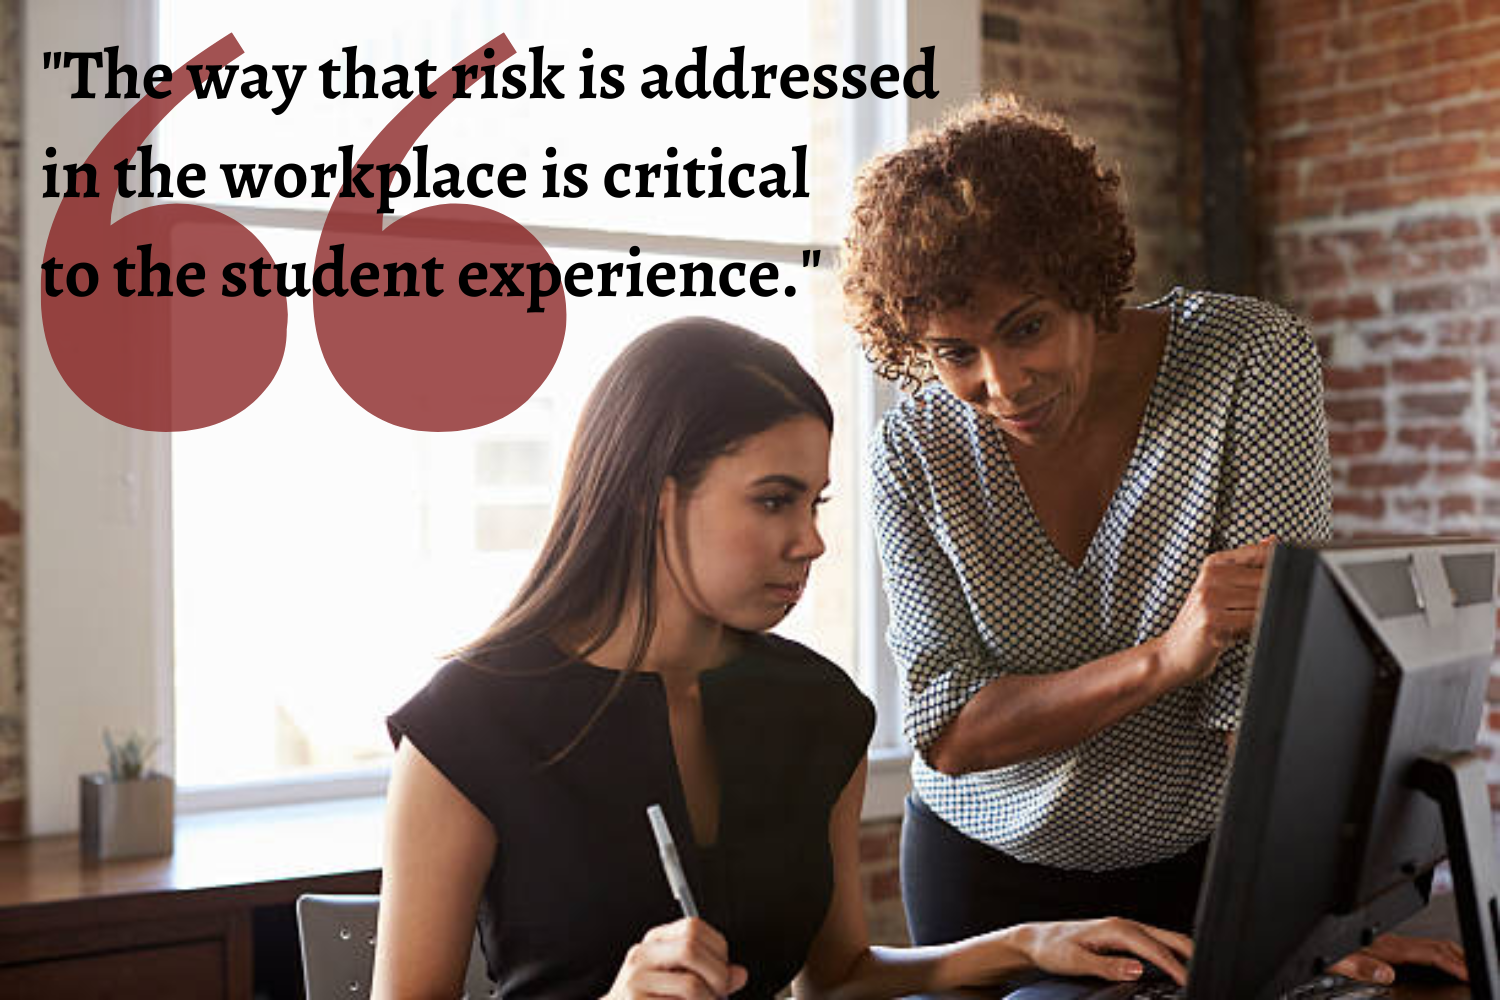 Two women stand near a window, looking down at a computer. "The way that risk is assessed in the workplace is critical to the student experience."